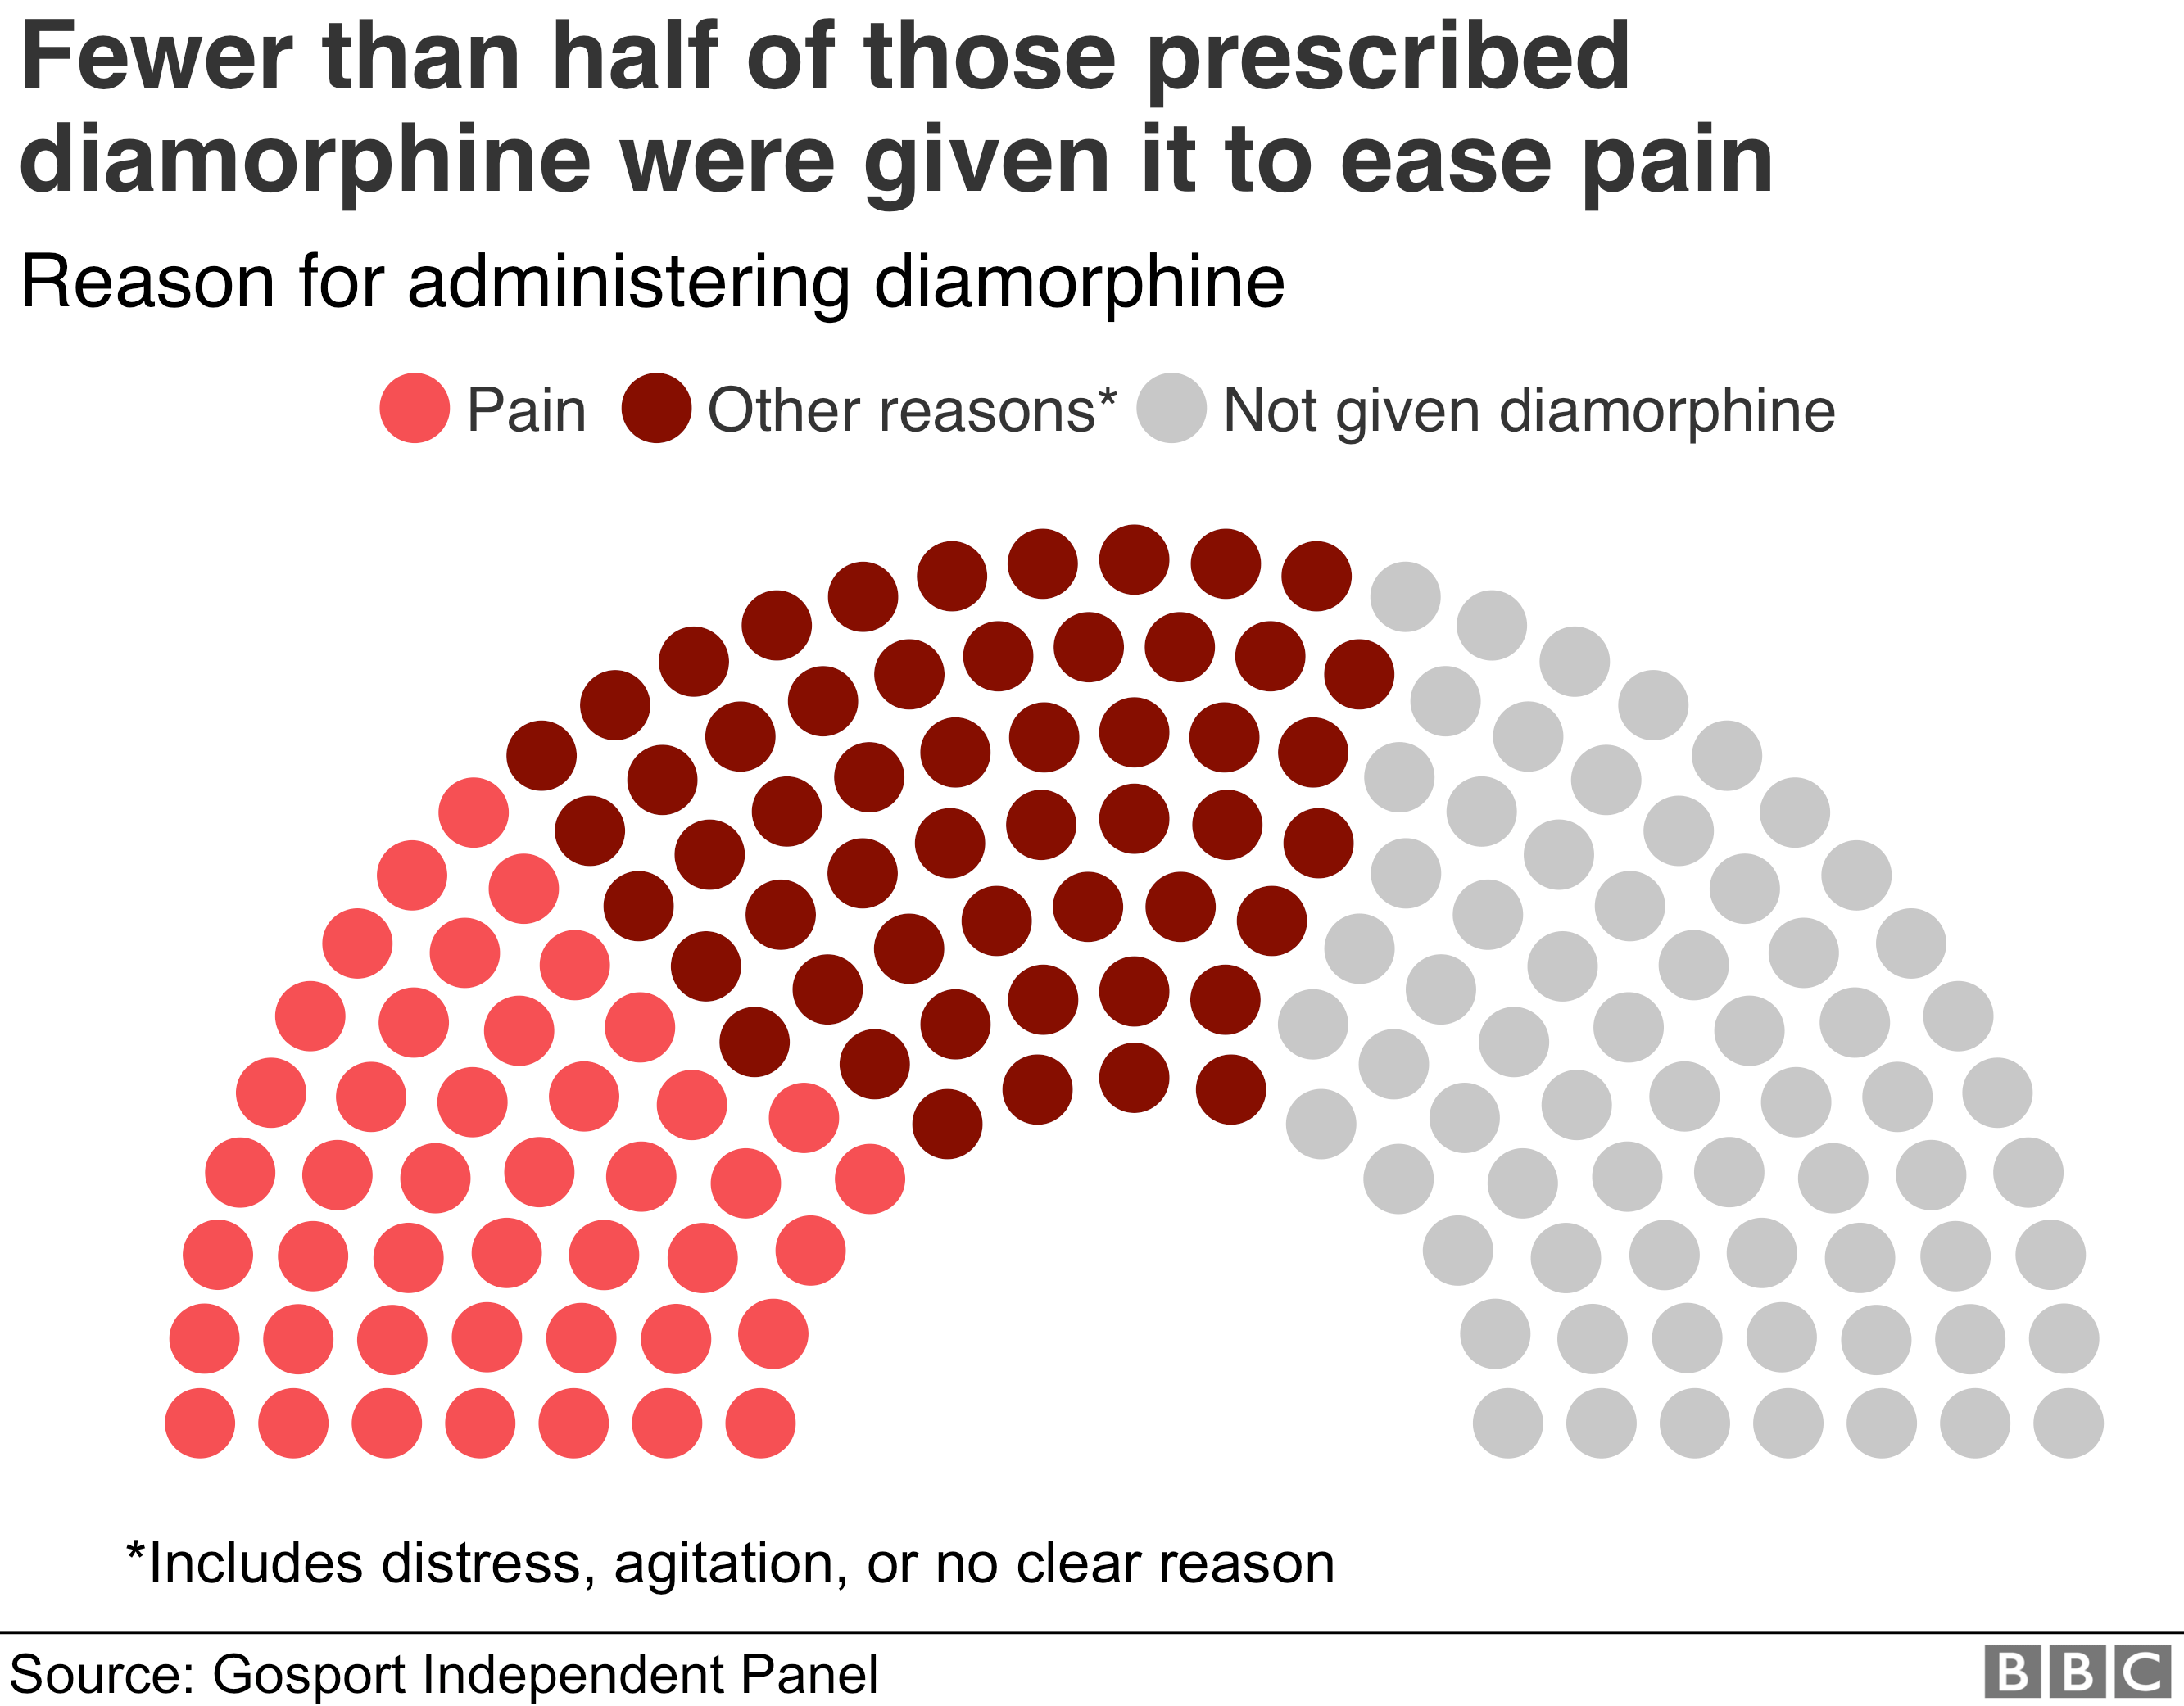 Chart showing reason opioids were administered